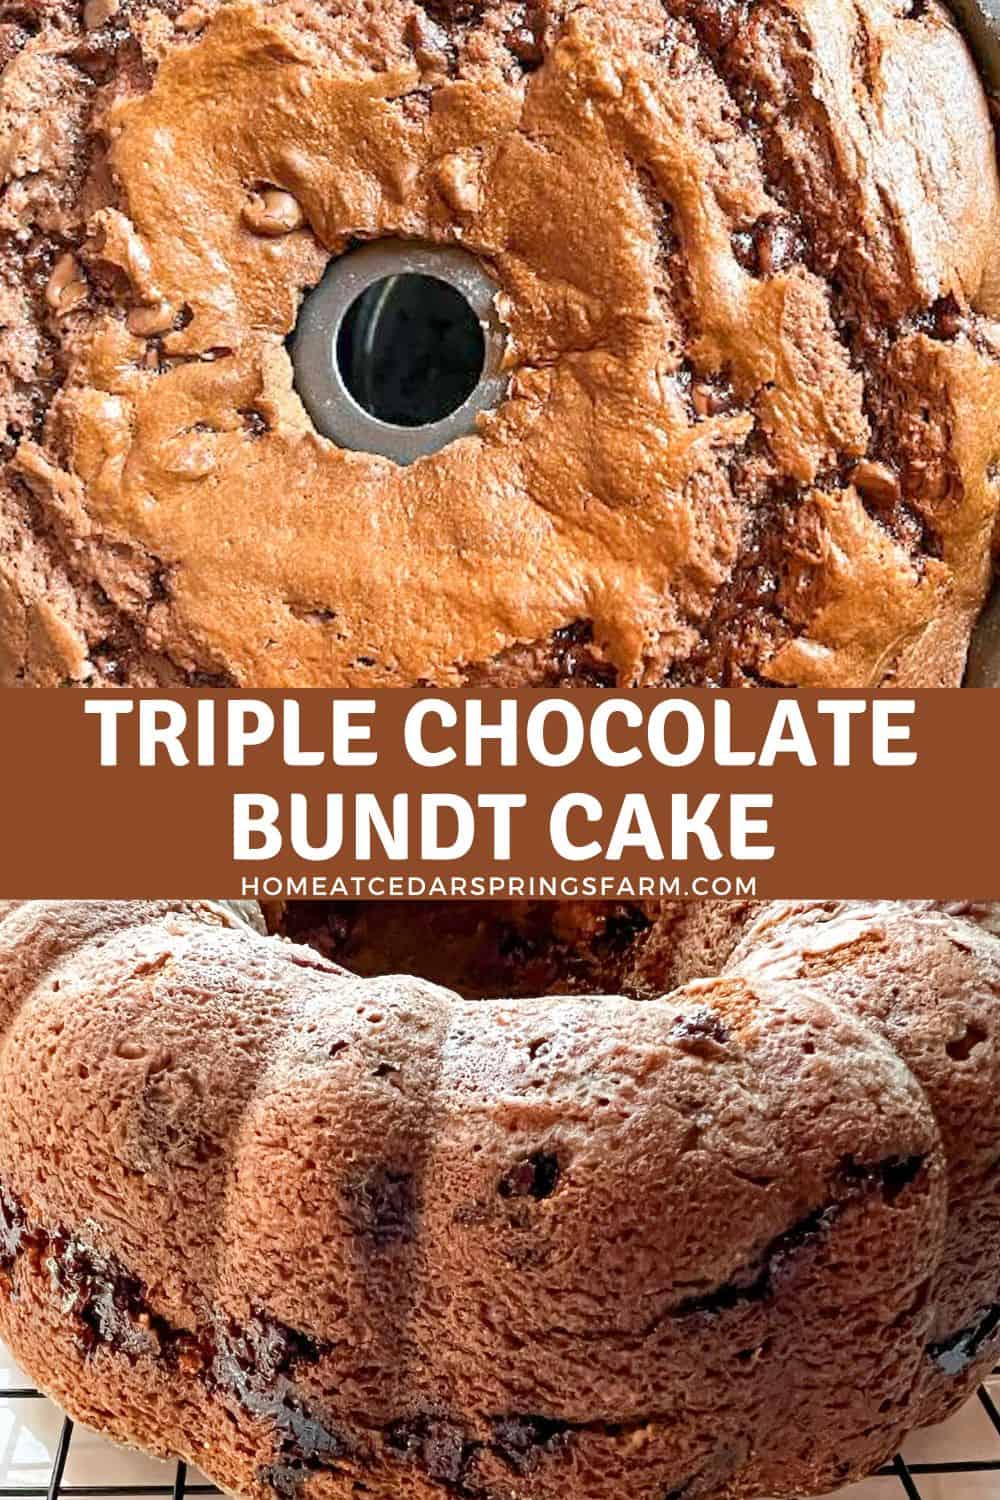 Cooked bundt cakes shown. One is in the pan and the other is on a wire rack cooling. Text overlay.